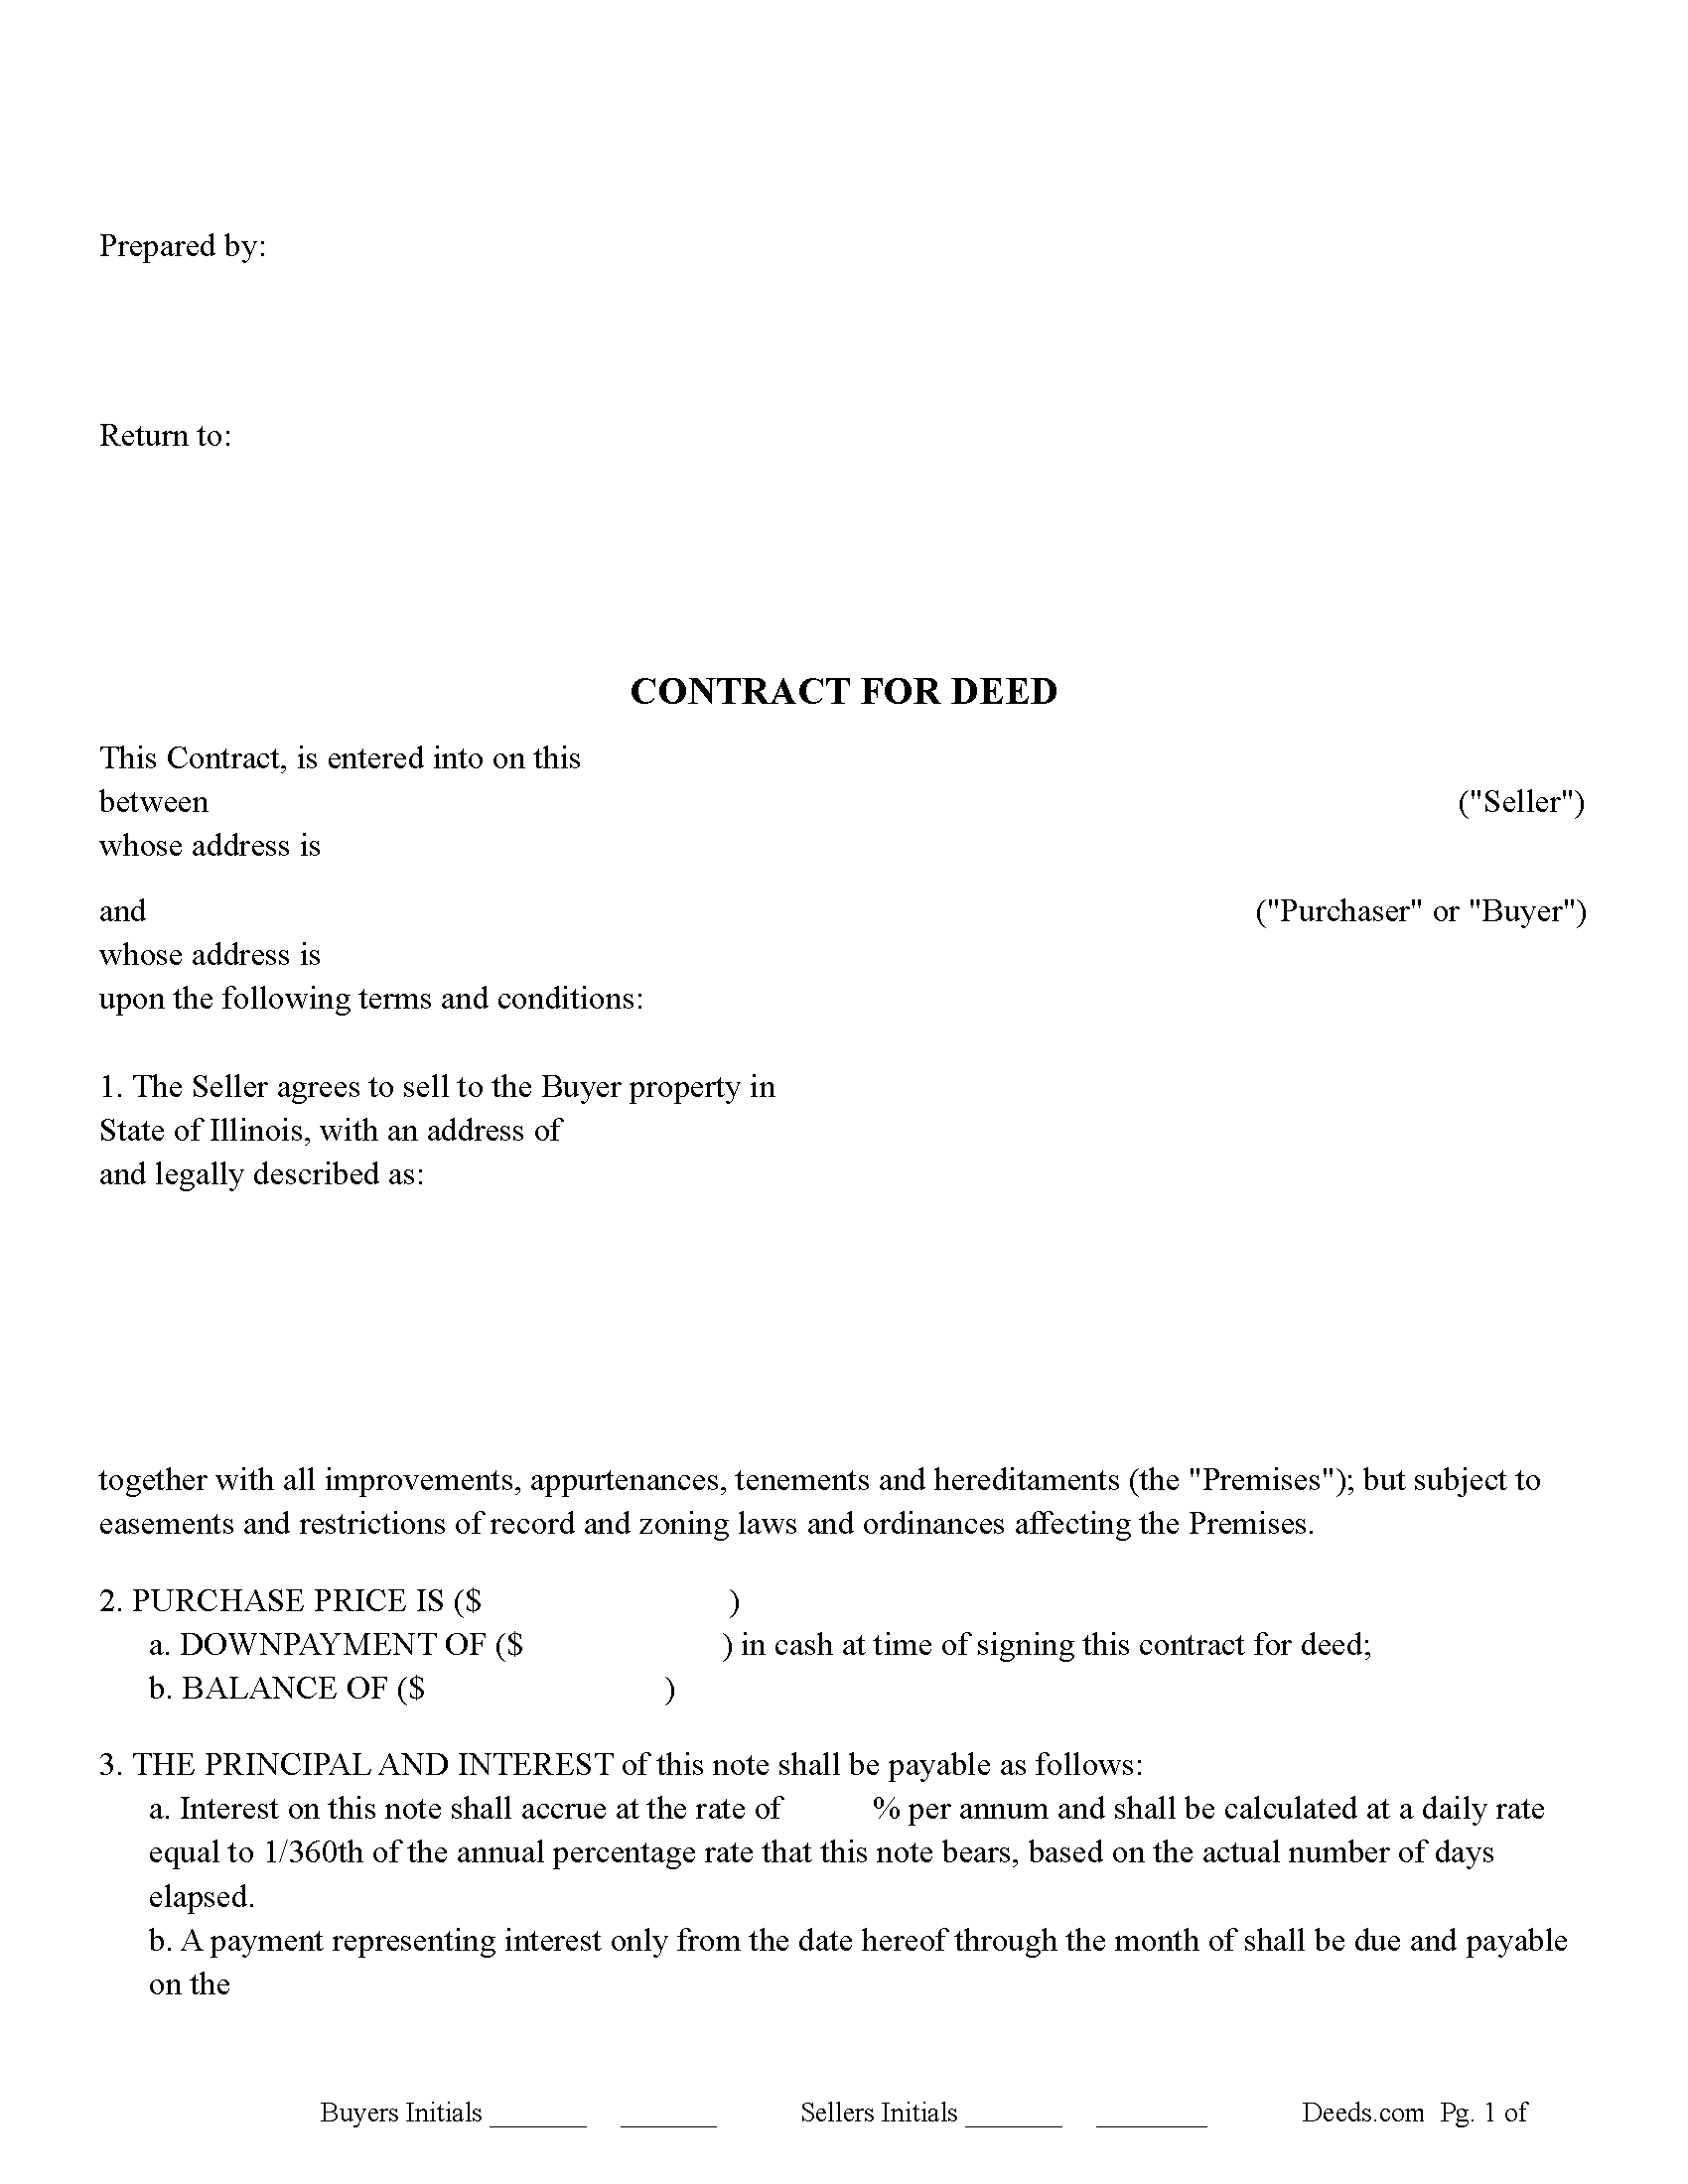 Illinois Contract for Deed Image